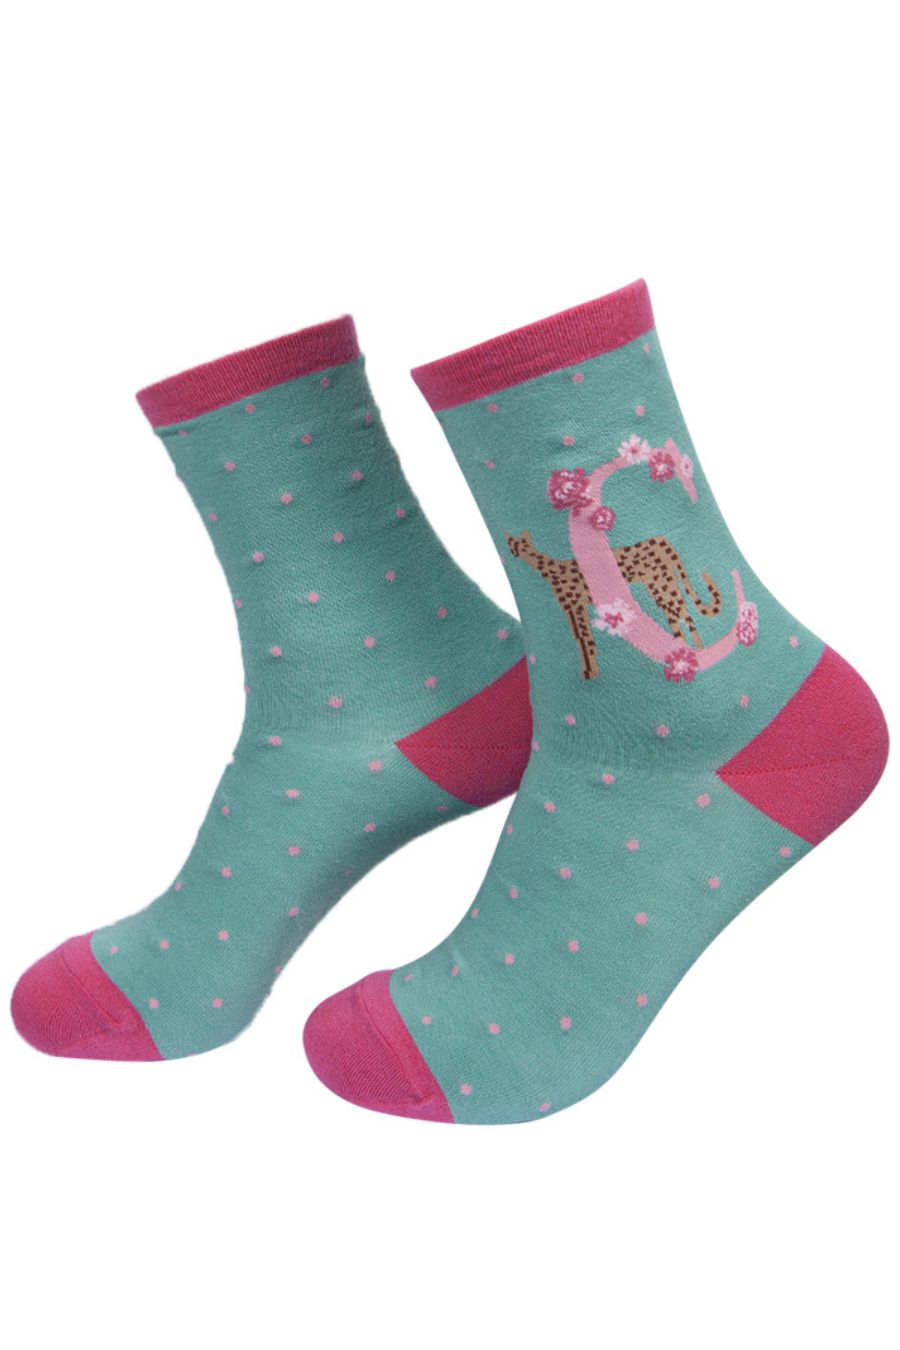 mint green socks with a large letter c, a cheetah and a floral pattern on the ankle